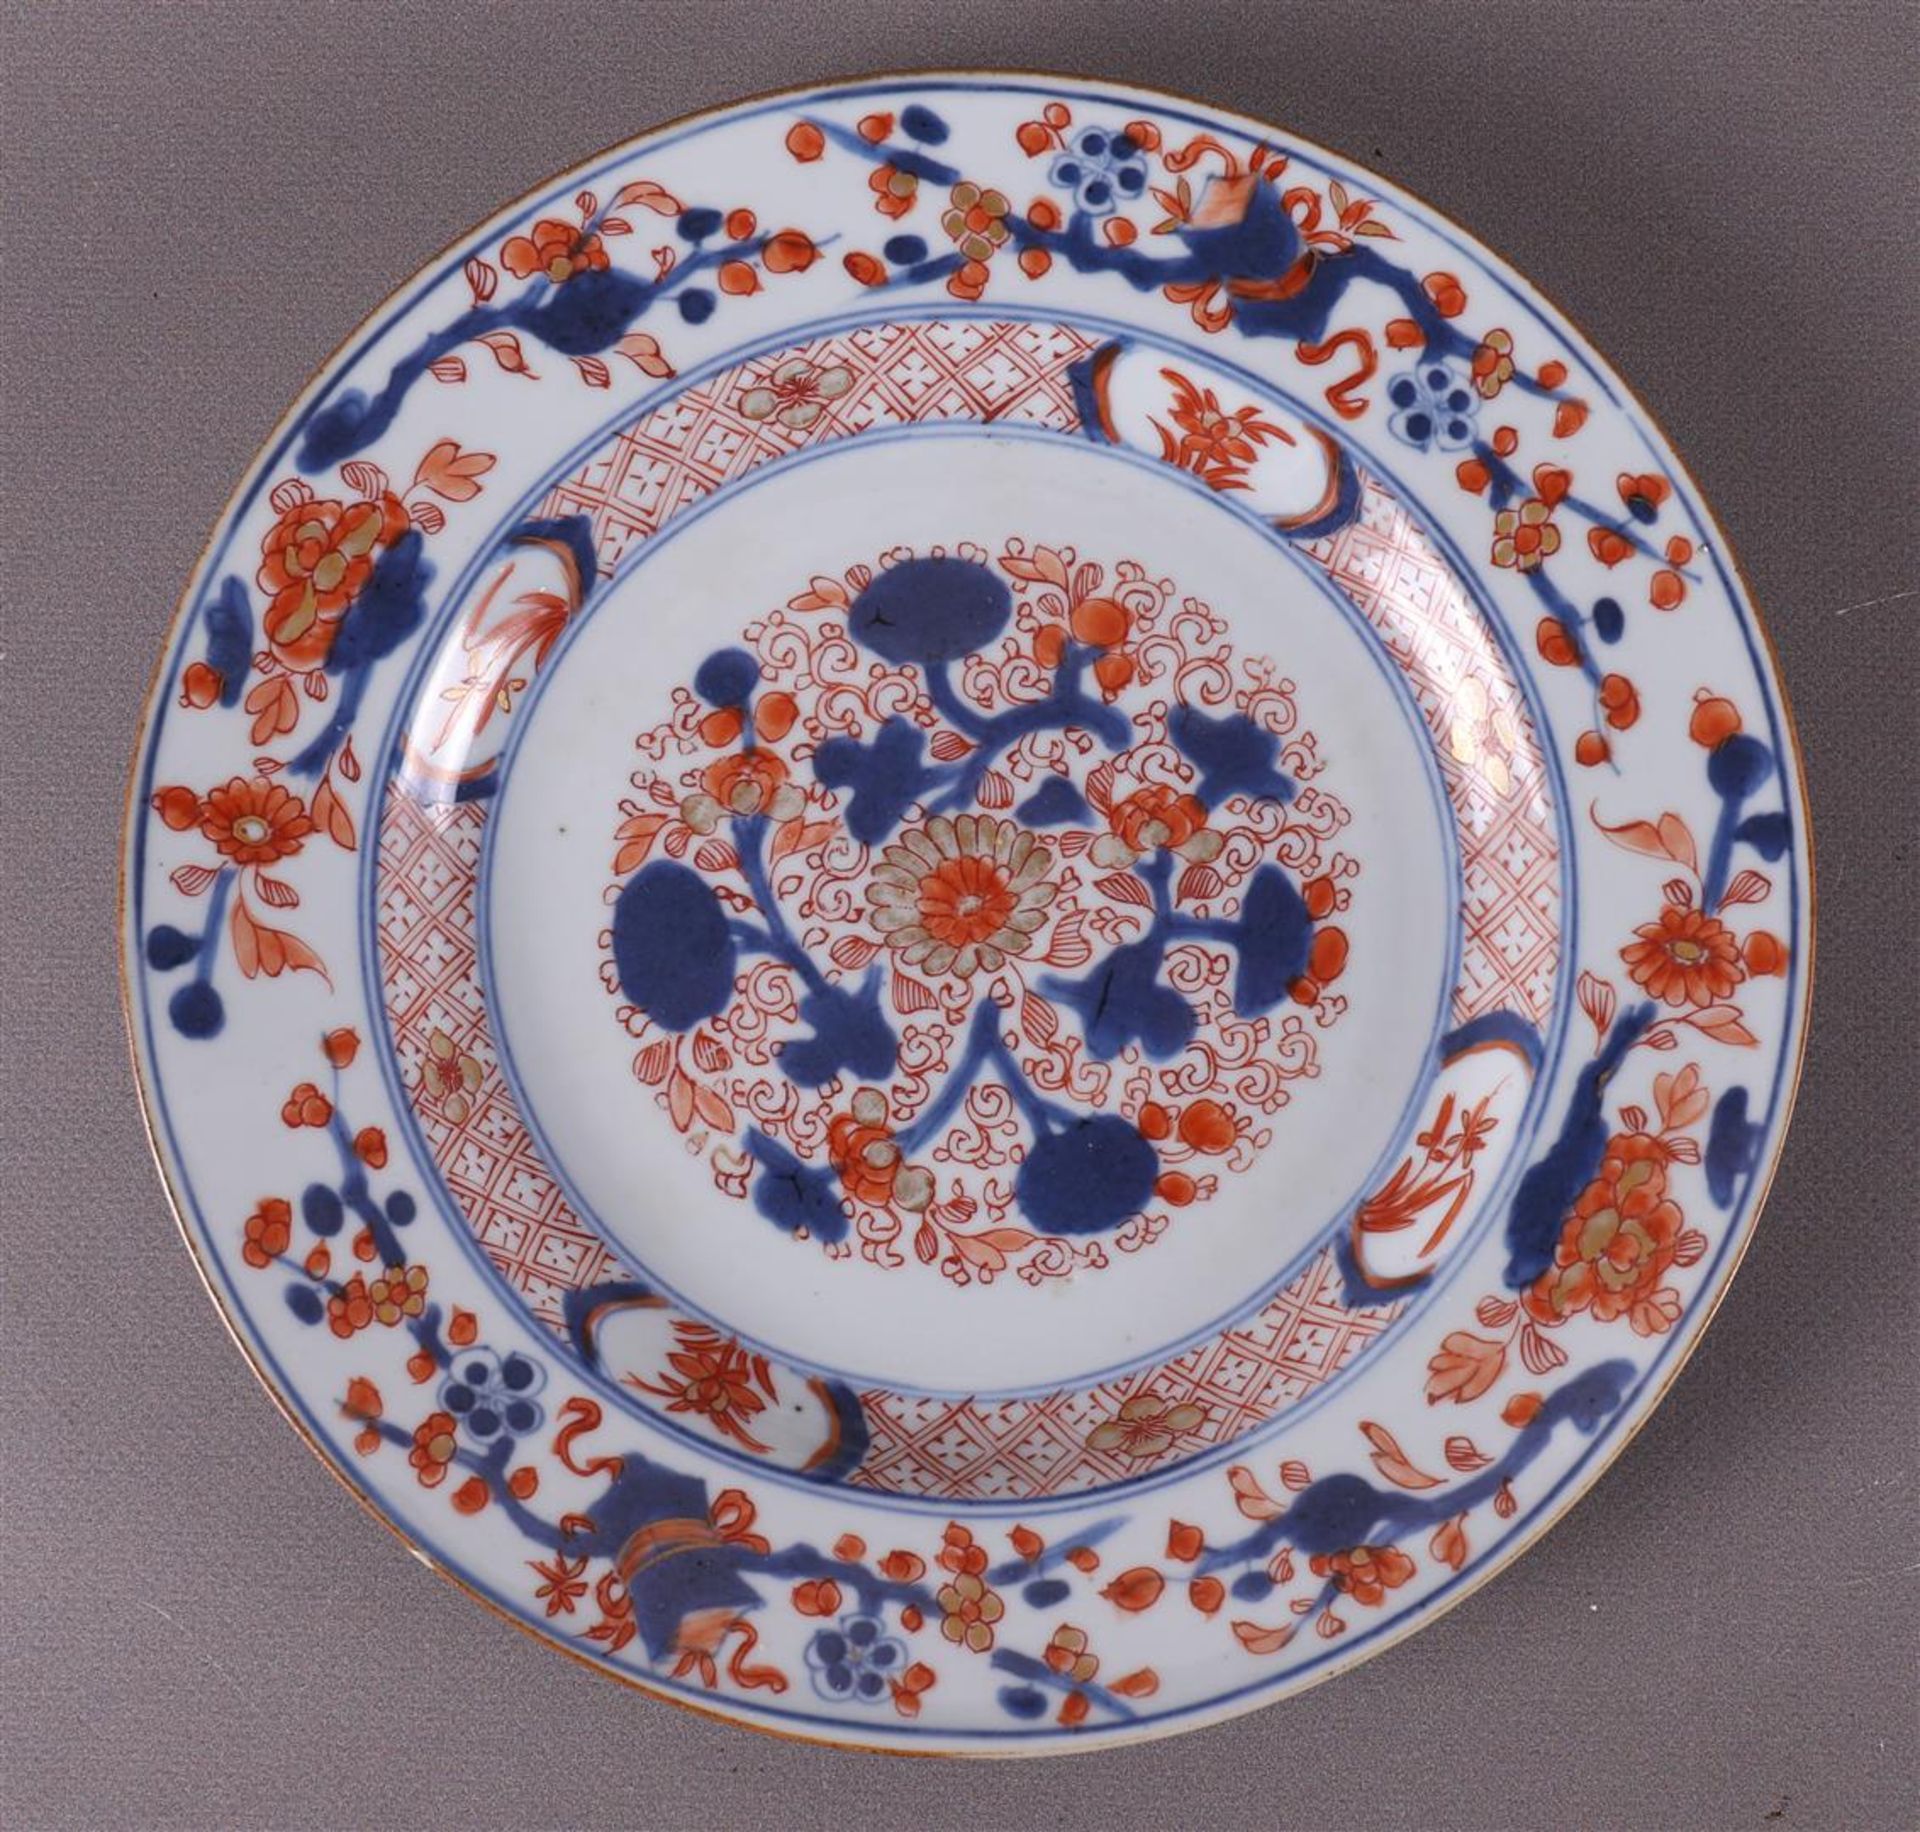 A porcelain Chinese Imari plate, China, 18th century. - Image 2 of 5